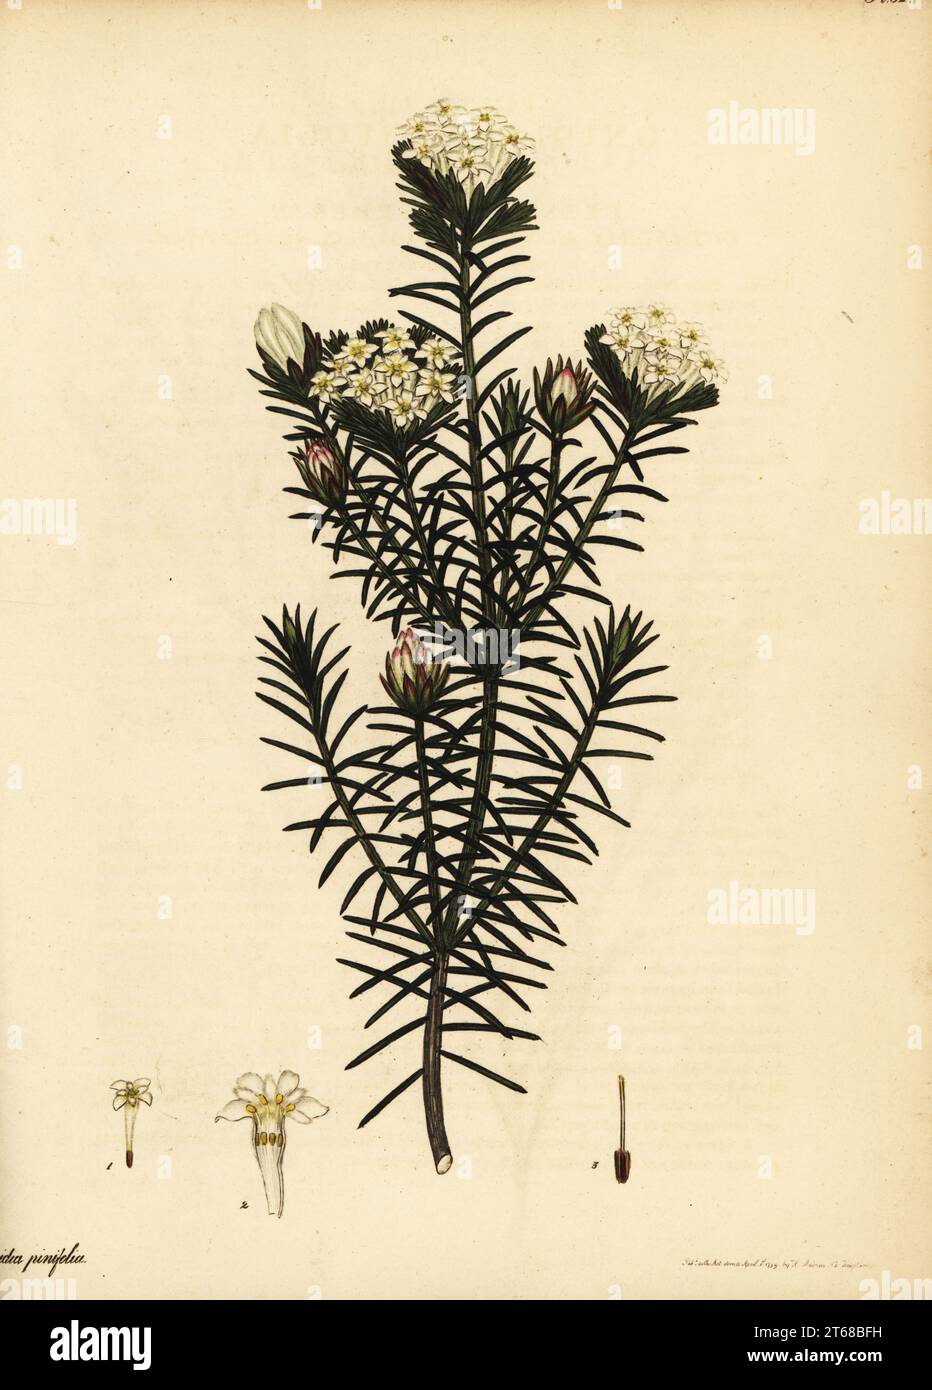 Pine-leaved saffron-bush, Gnidia pinifolia. Cape of Good Hope, South Africa. Pine-leaved gnidia, Gnidia pinifolia. Copperplate engraving drawn, engraved and hand-coloured by Henry Andrews from his Botanical Register, Volume 1, published in London, 1799. Stock Photo